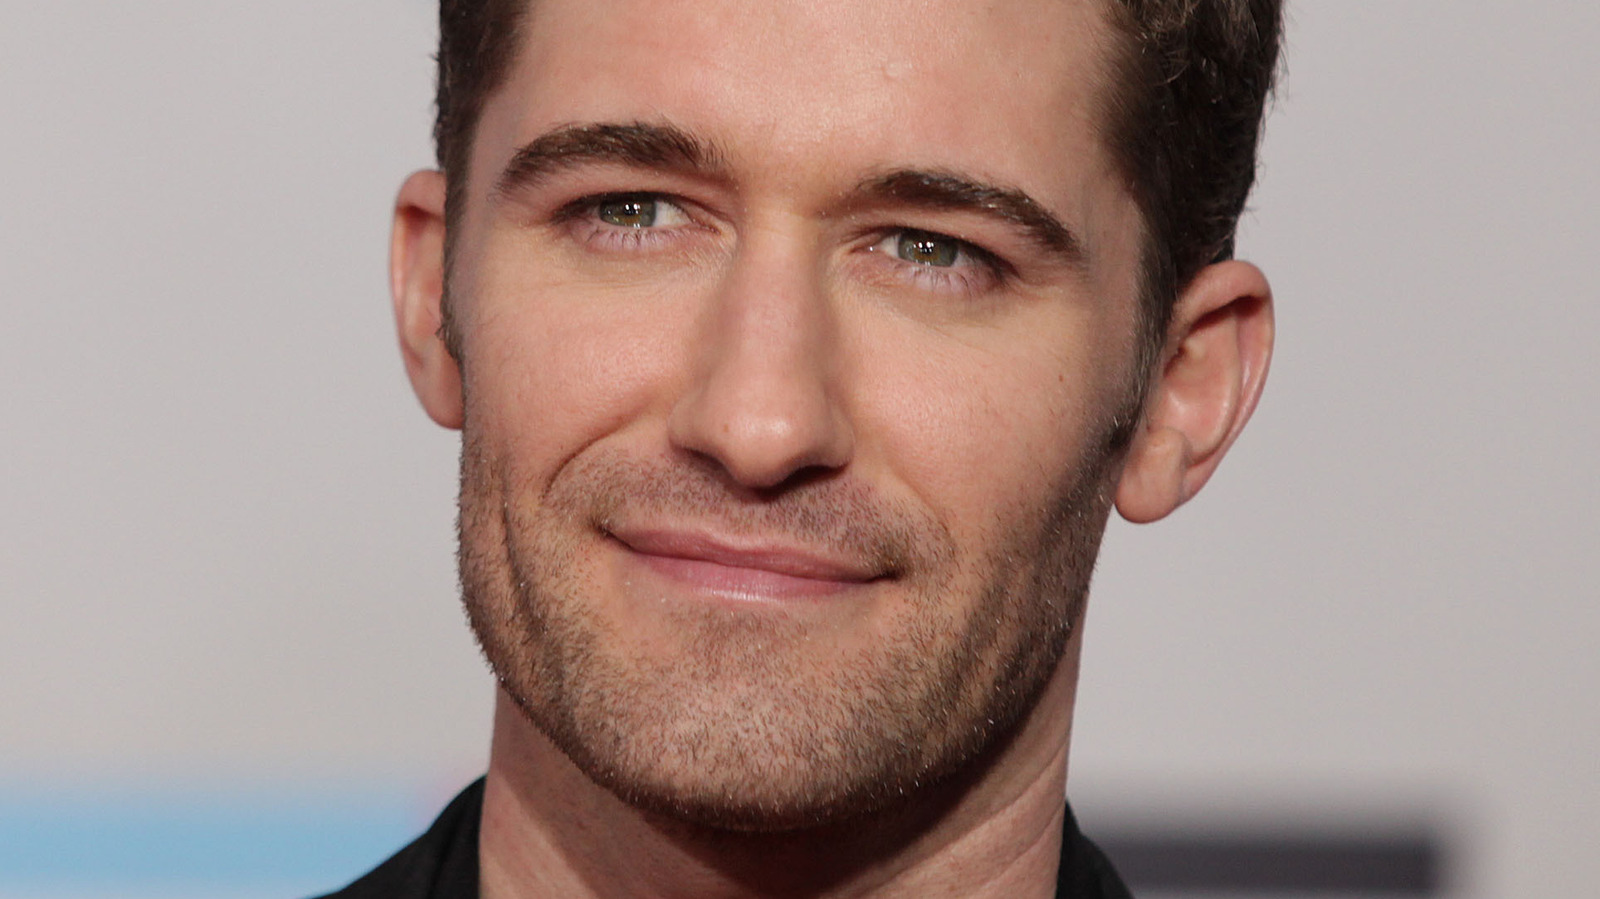 Matthew Morrison’s So You Think You Can Dance Replacement Was Just Revealed